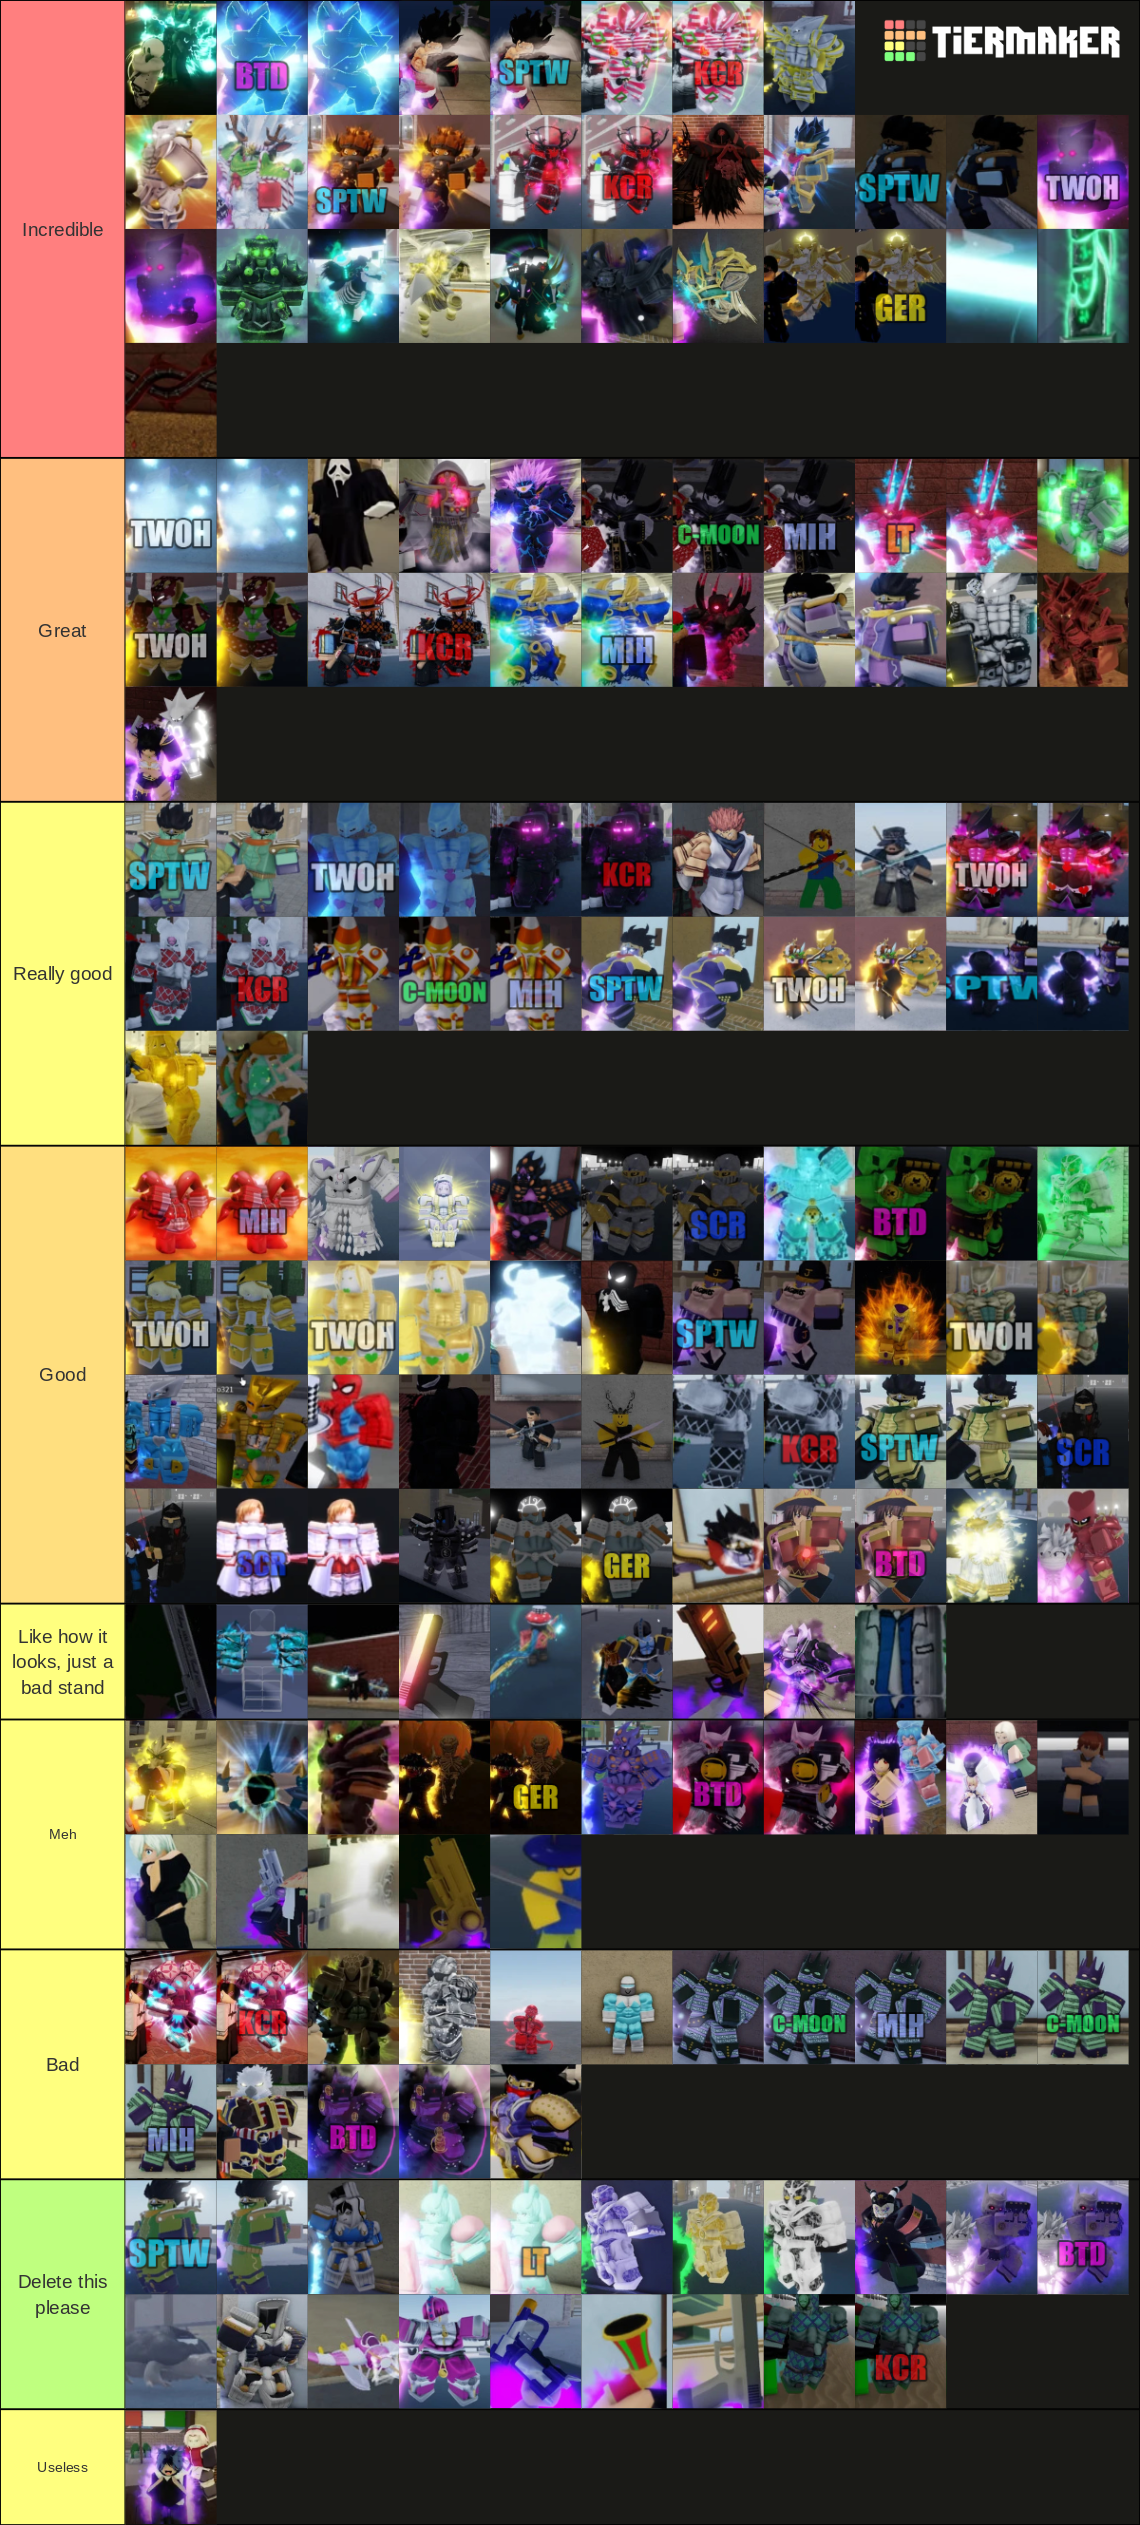 Create a Yba stand skins Tier List - TierMaker